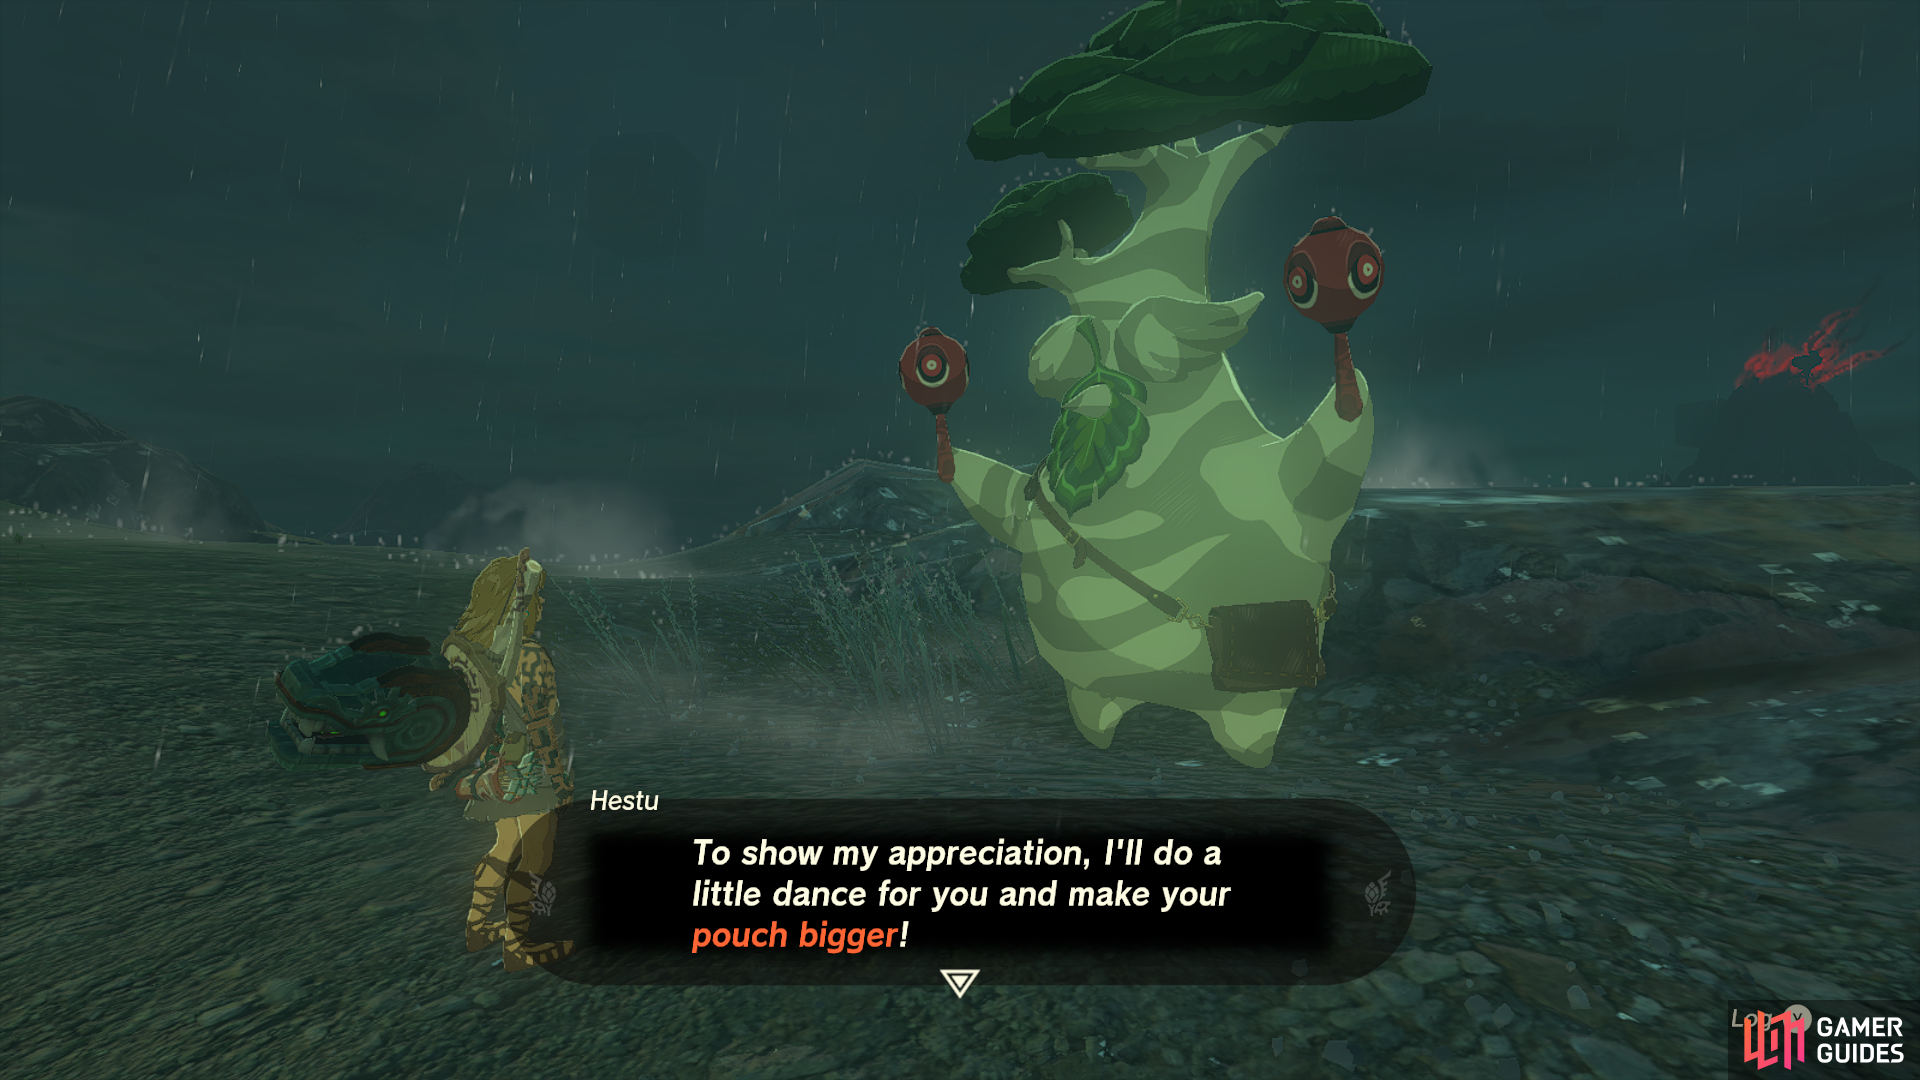 Hestu is able to upgrade your pouch in The Legend of Zelda: Tears of The Kingdom.